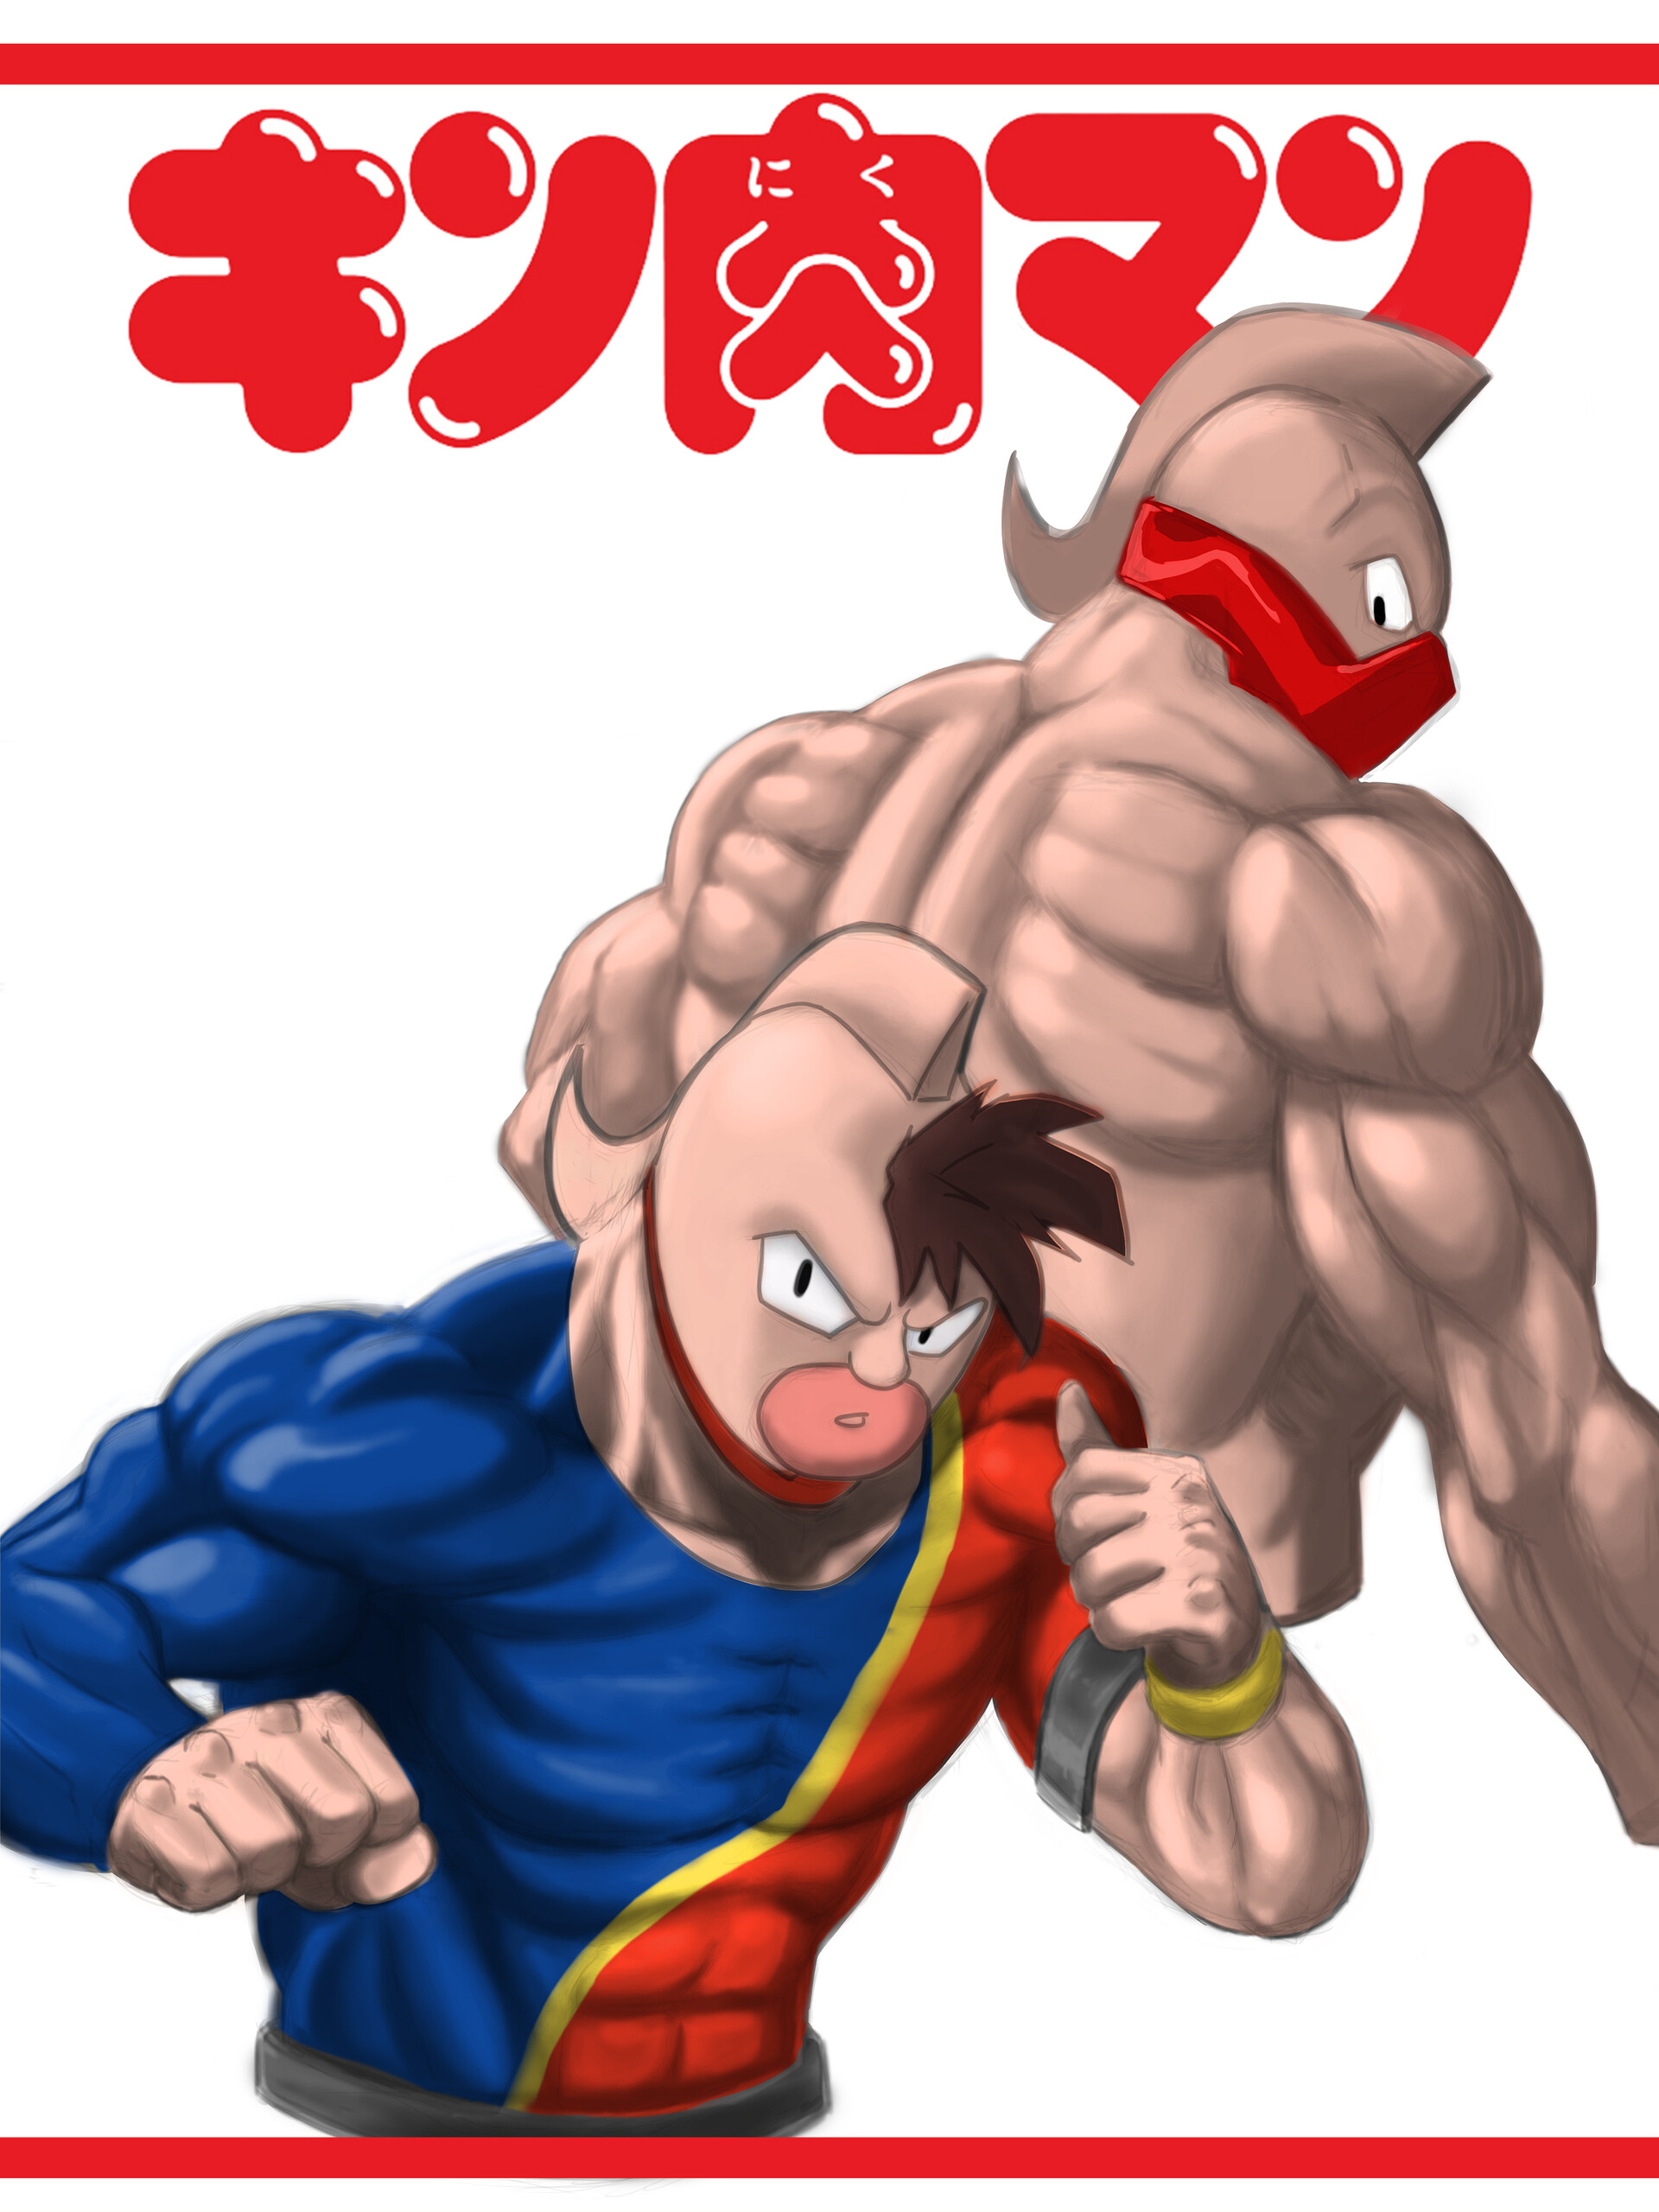 Cult-classic Ultimate Muscle manga series rumoured to receive new anime  project